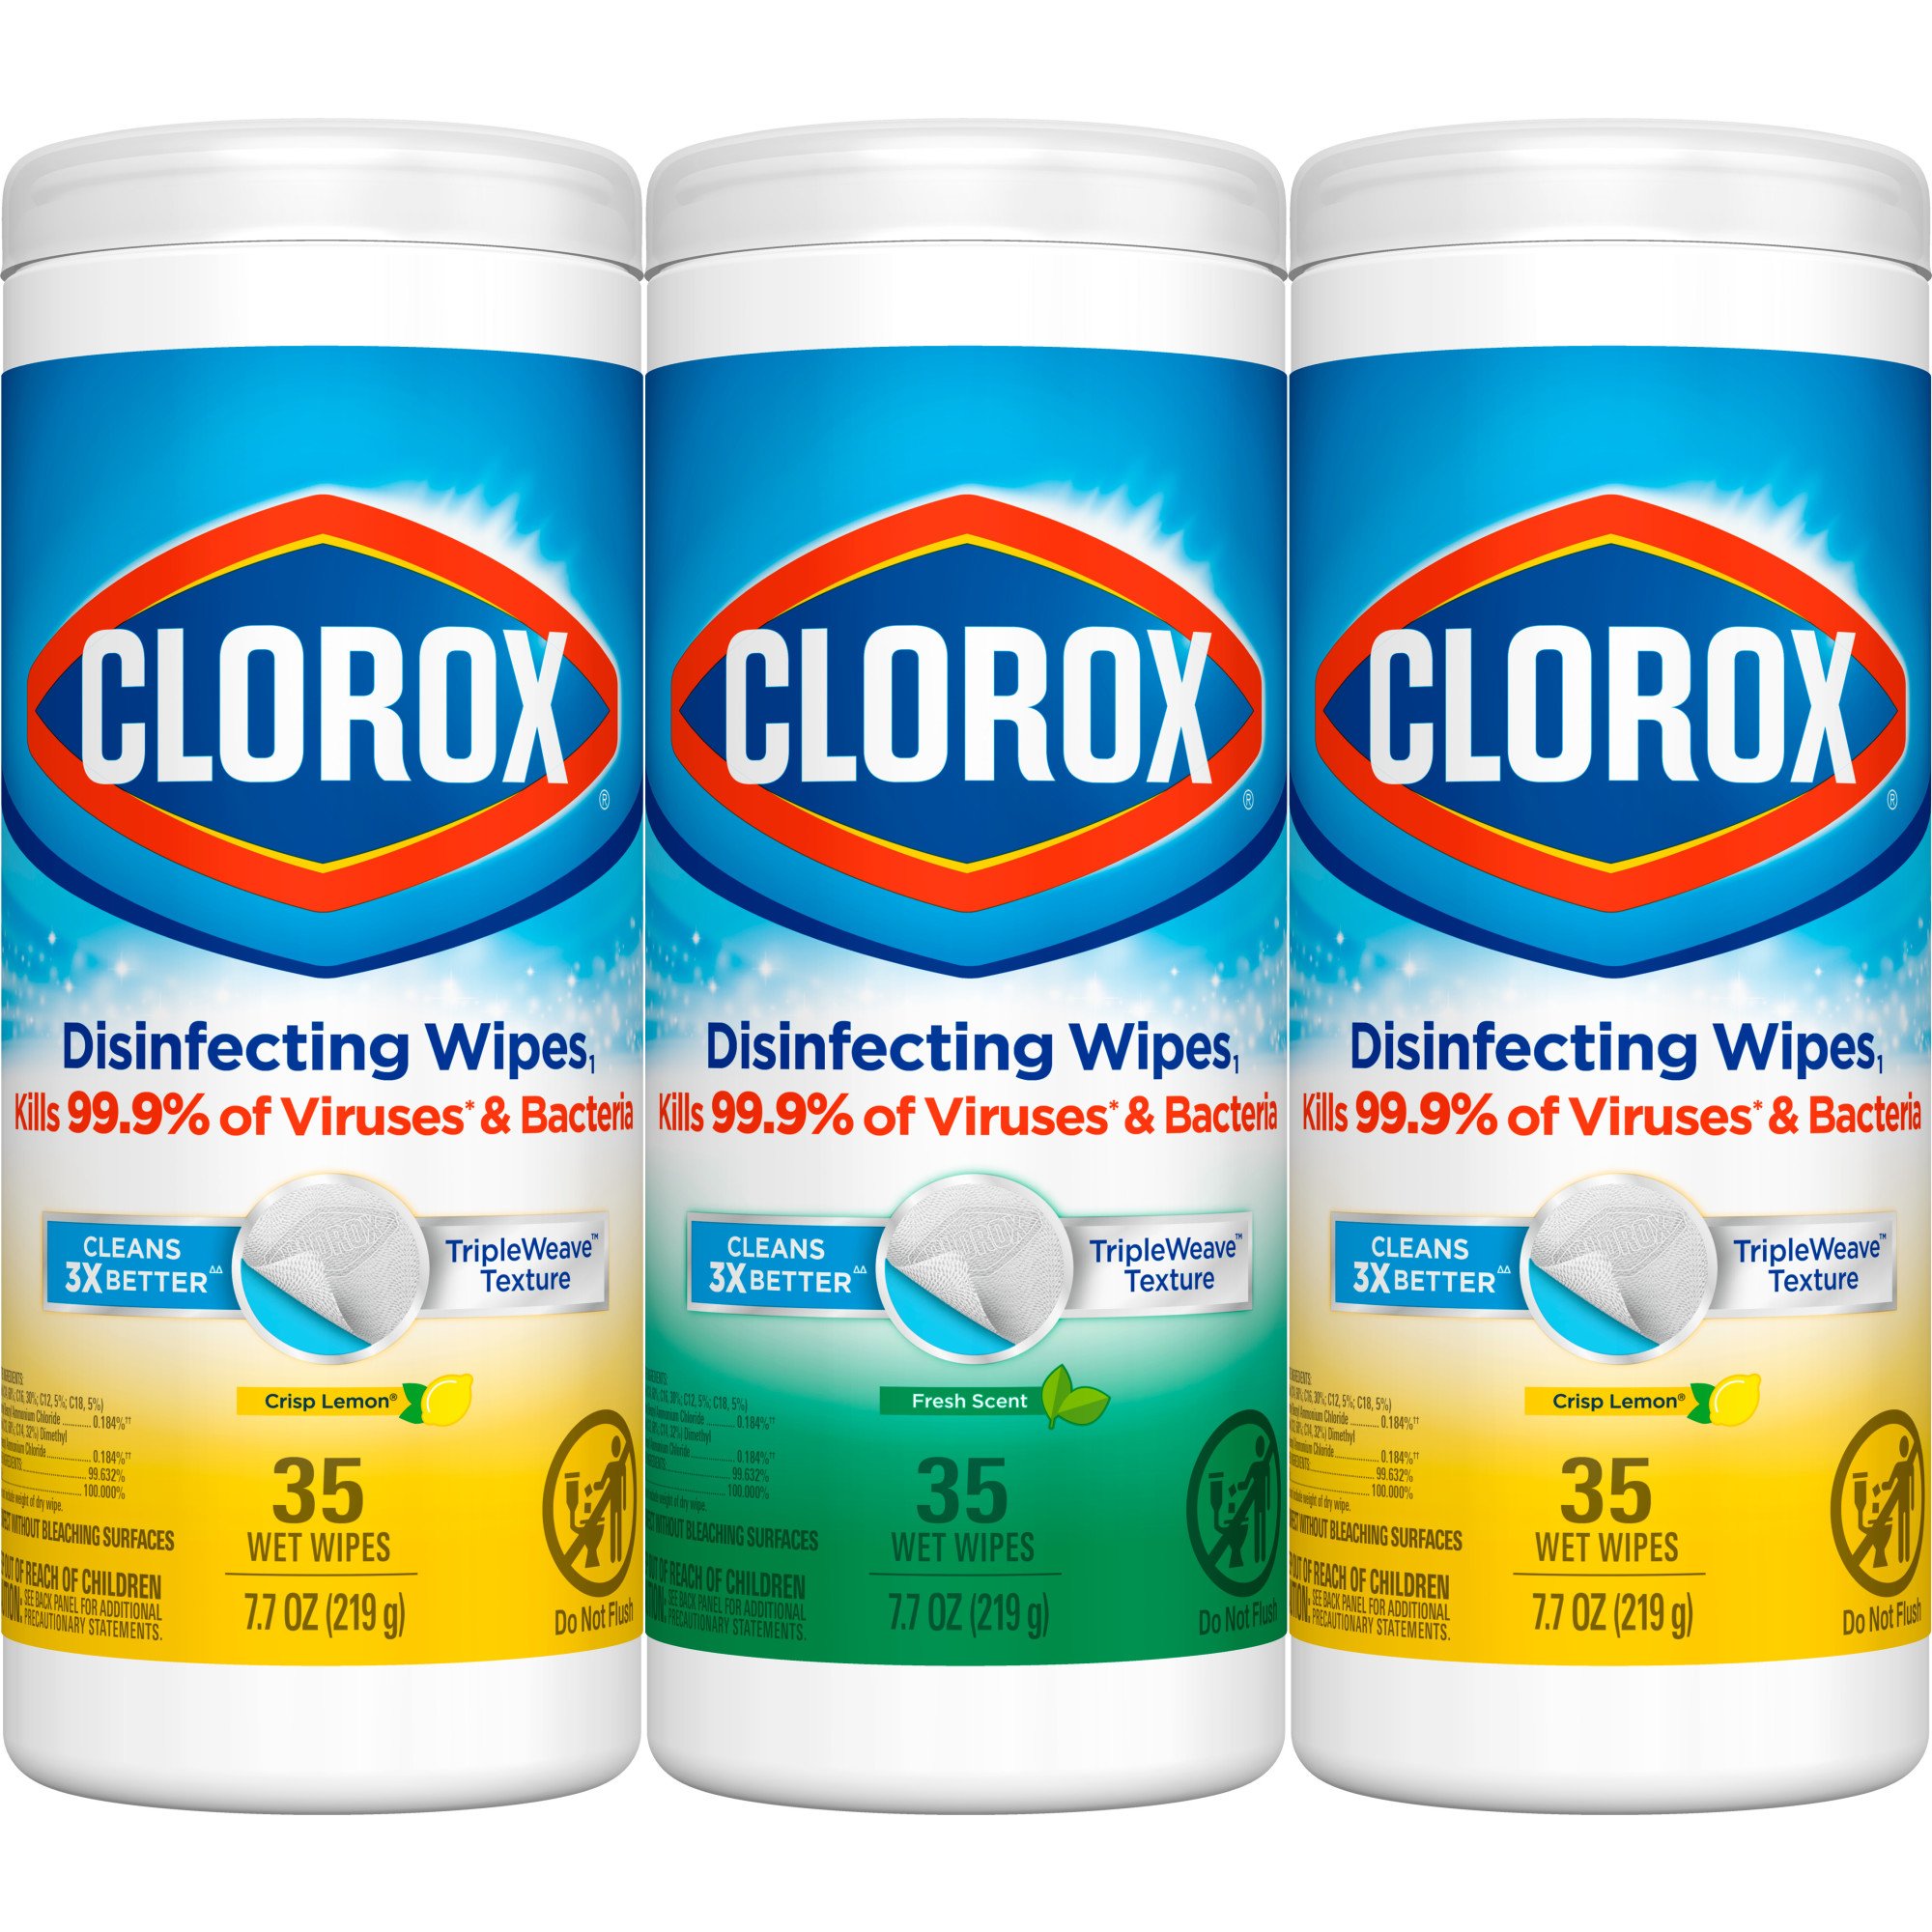 27-clorox-wipes-warning-label-labels-ideas-for-you